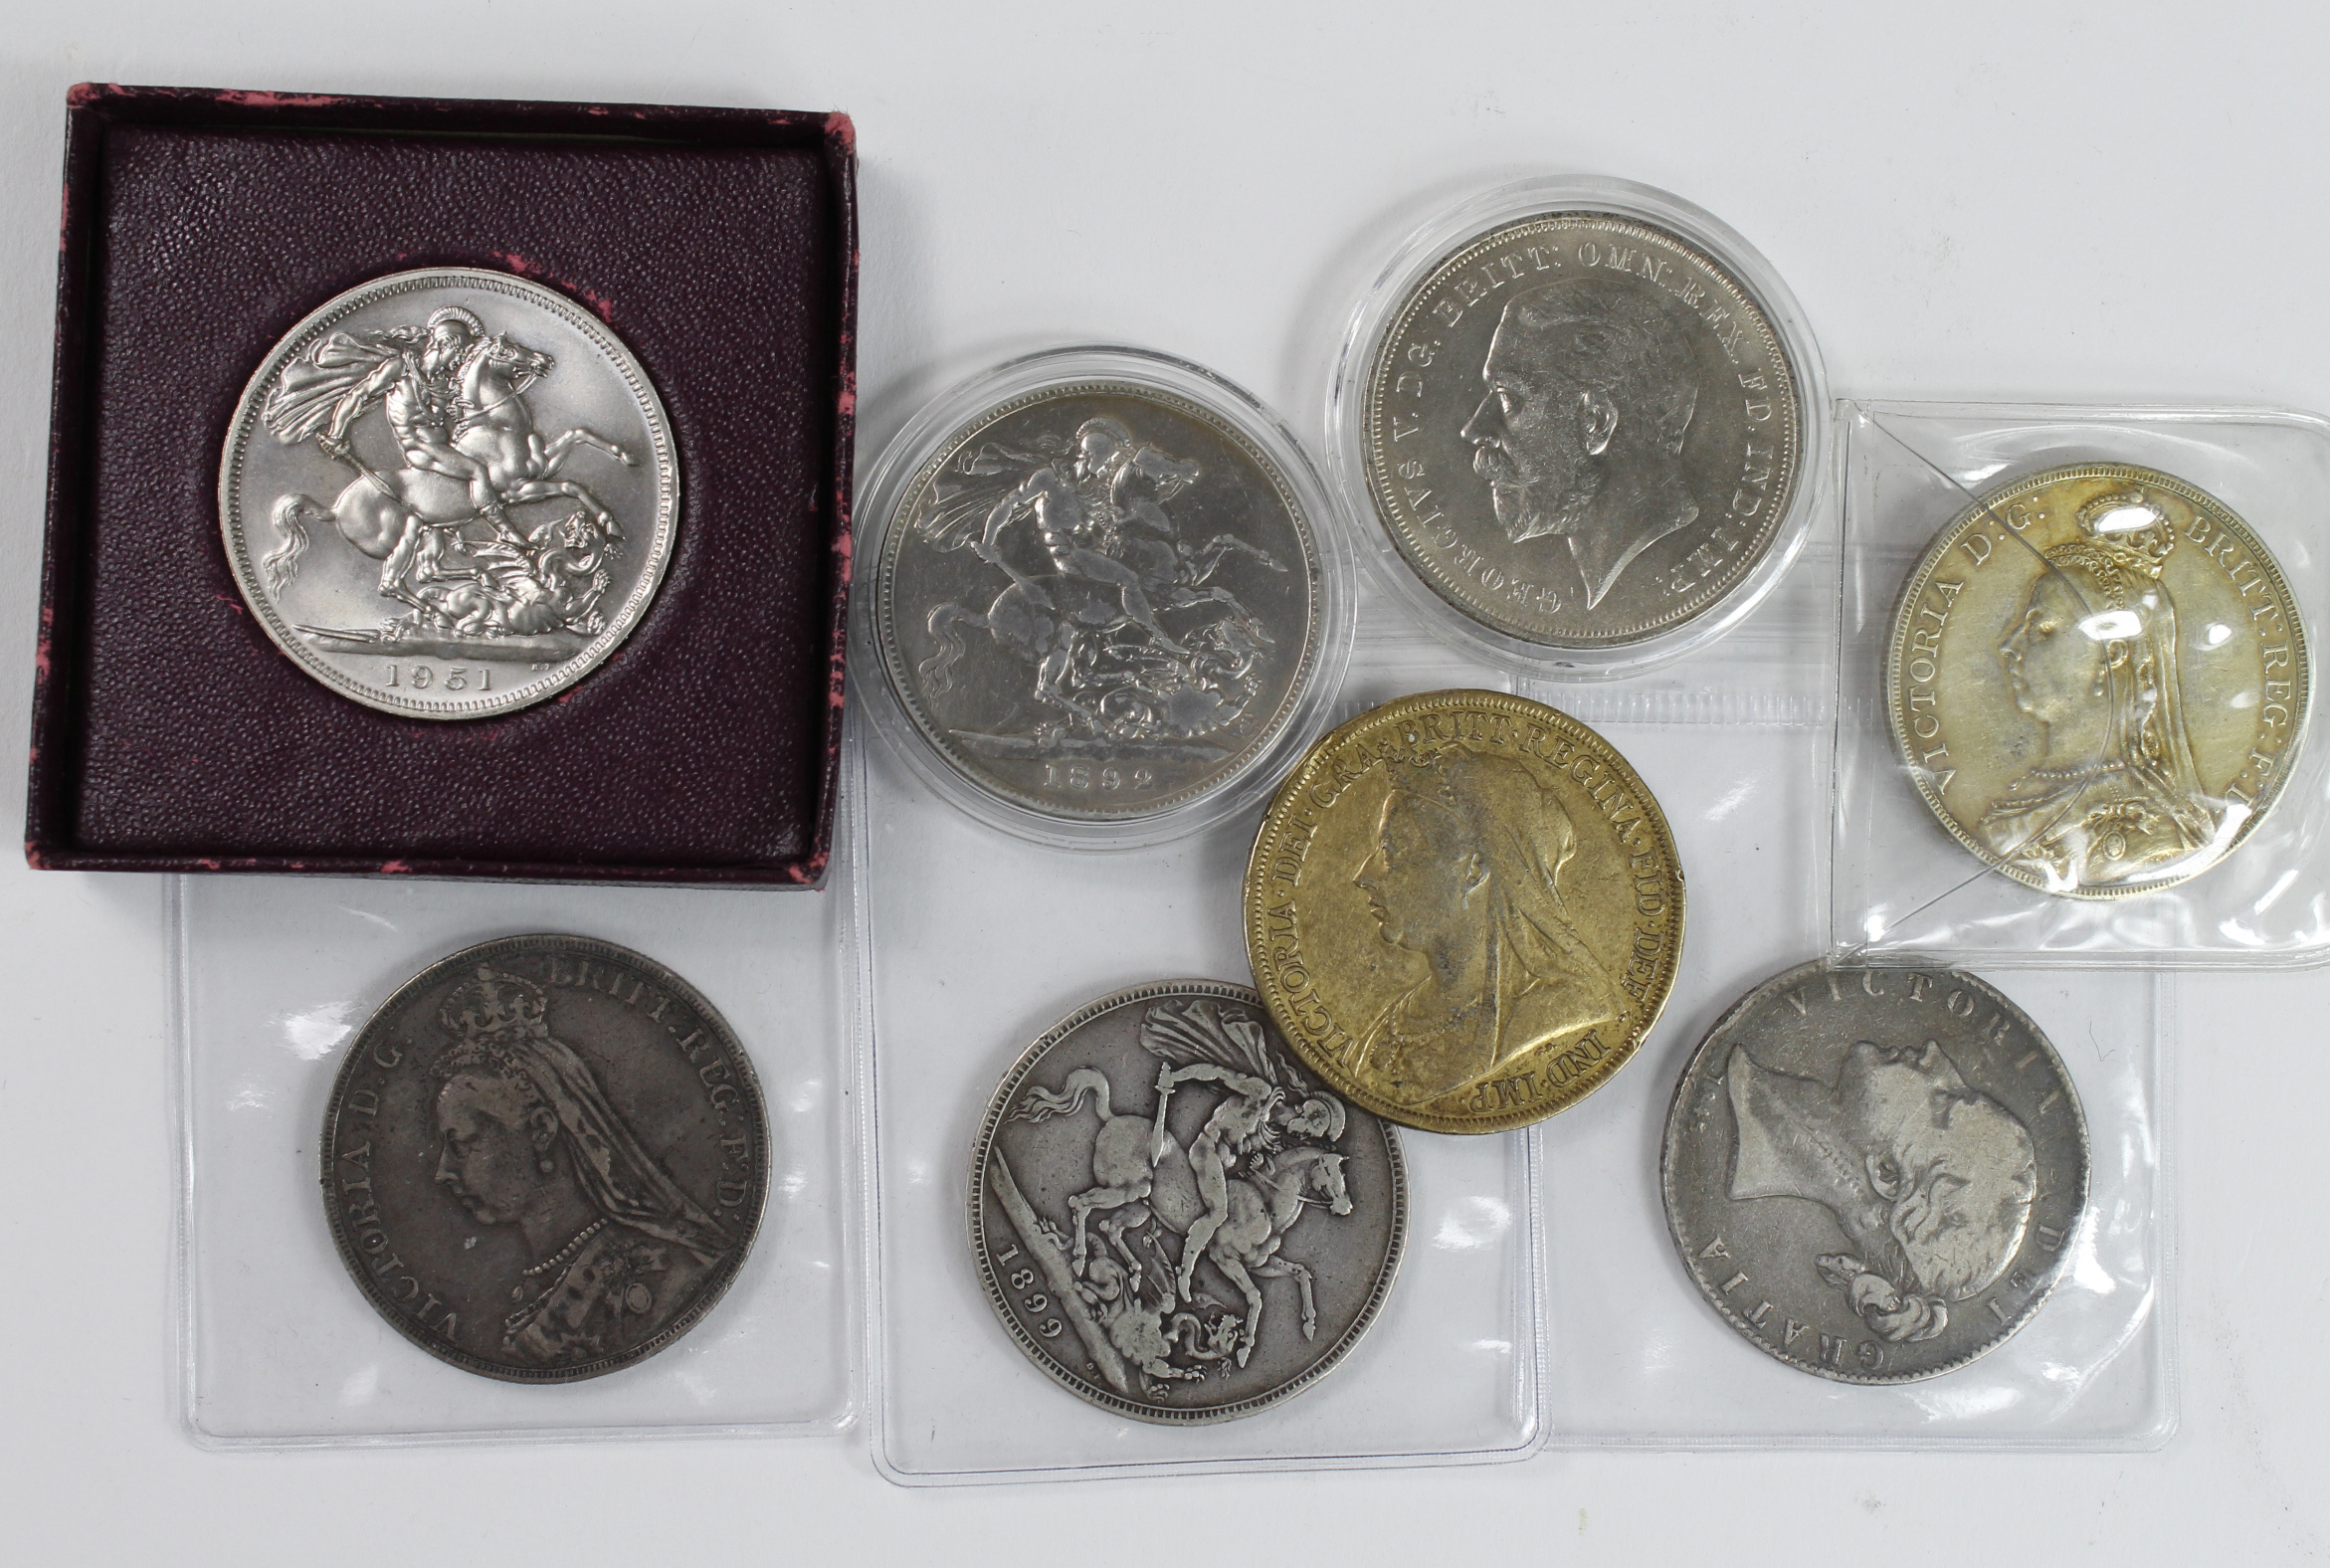 GB Crowns (8) 1845, 1889x2 , 1892, 1893 LVI, 1899 LXIII, 1935 & 1951. Mixed grades with a couple